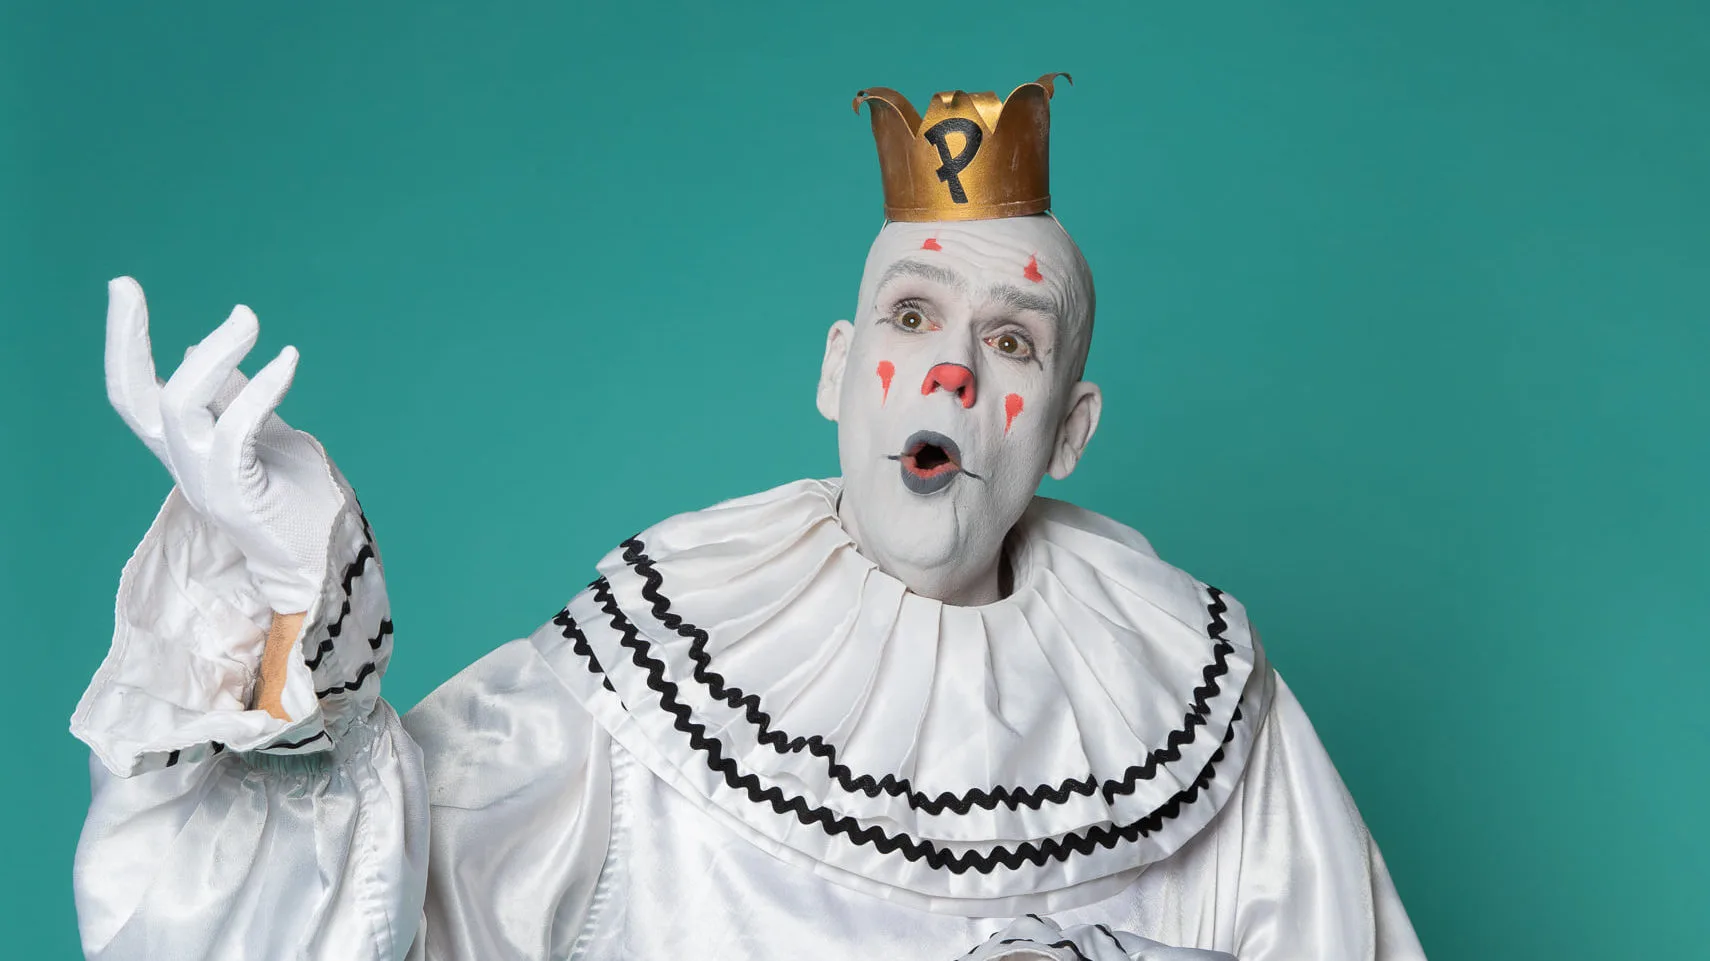 Puddles Pity Party poses against a teal background while singing